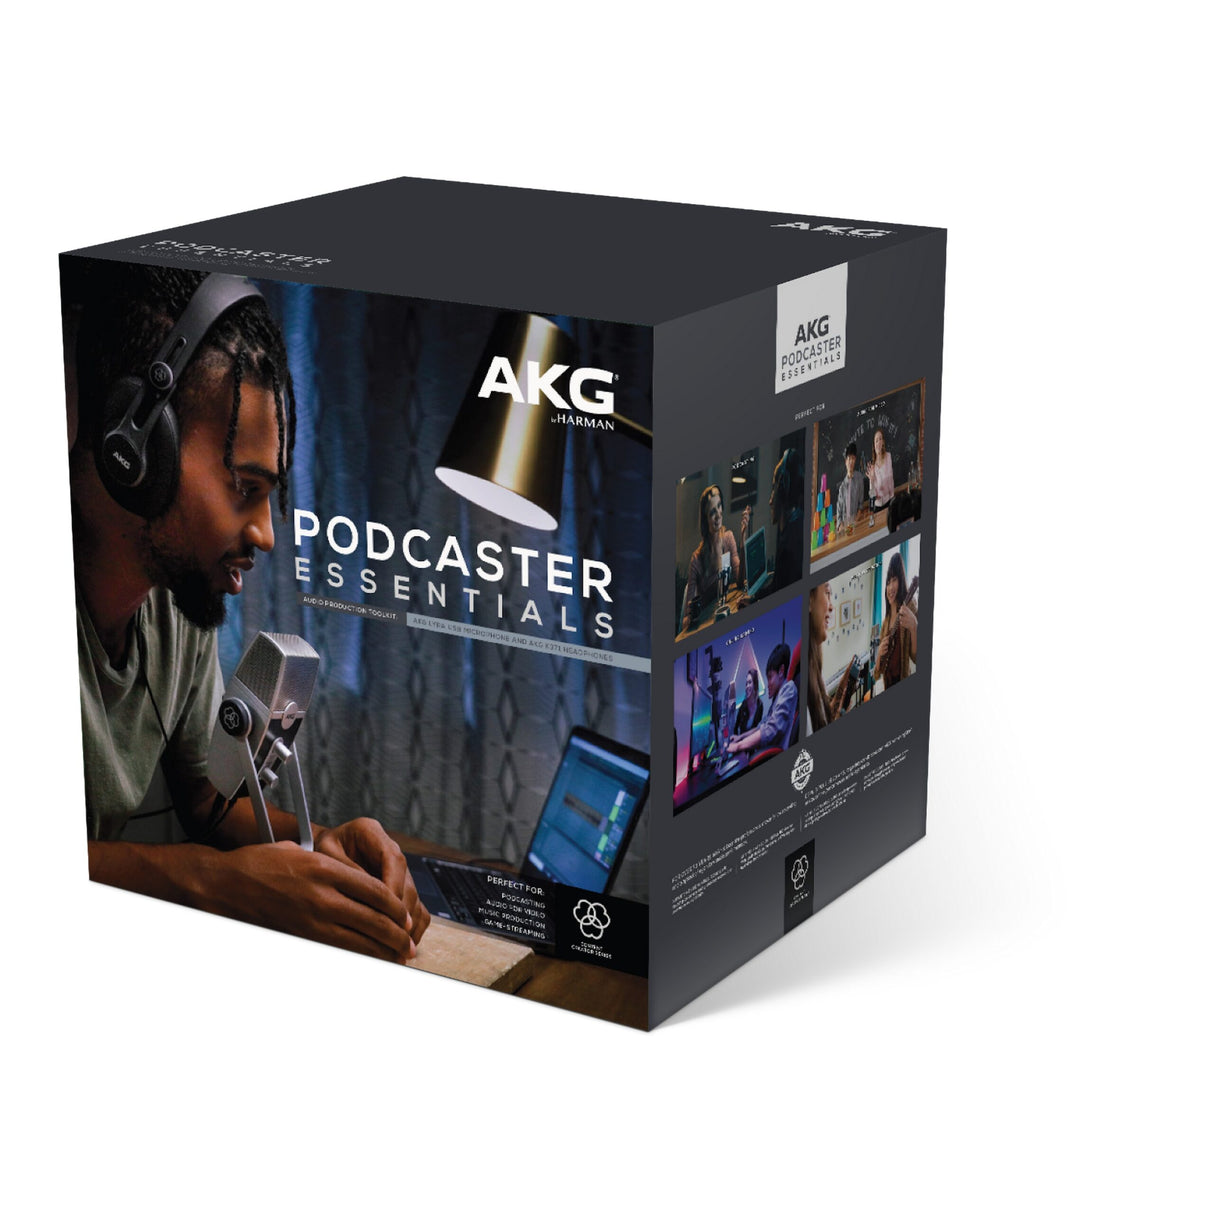 AKG Podcaster Essentials Audio Production Package with Lyra USB Microphone and K371 Headphone